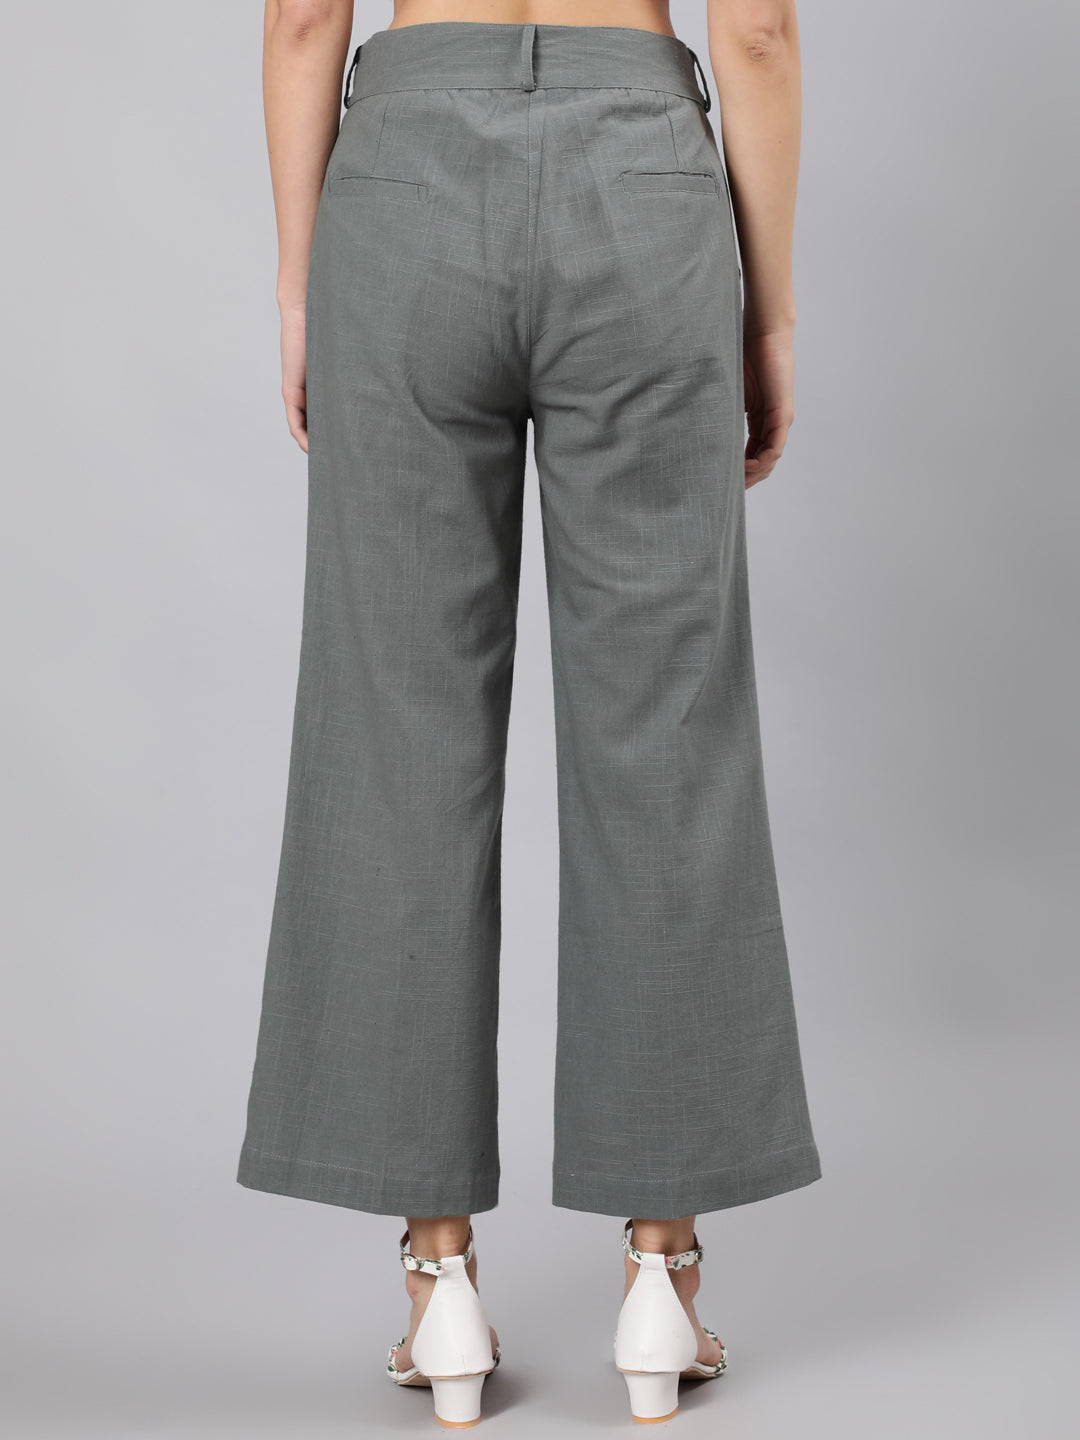 Women Charcoal Grey Regular Fit Solid Parallel Trousers - Kartovo